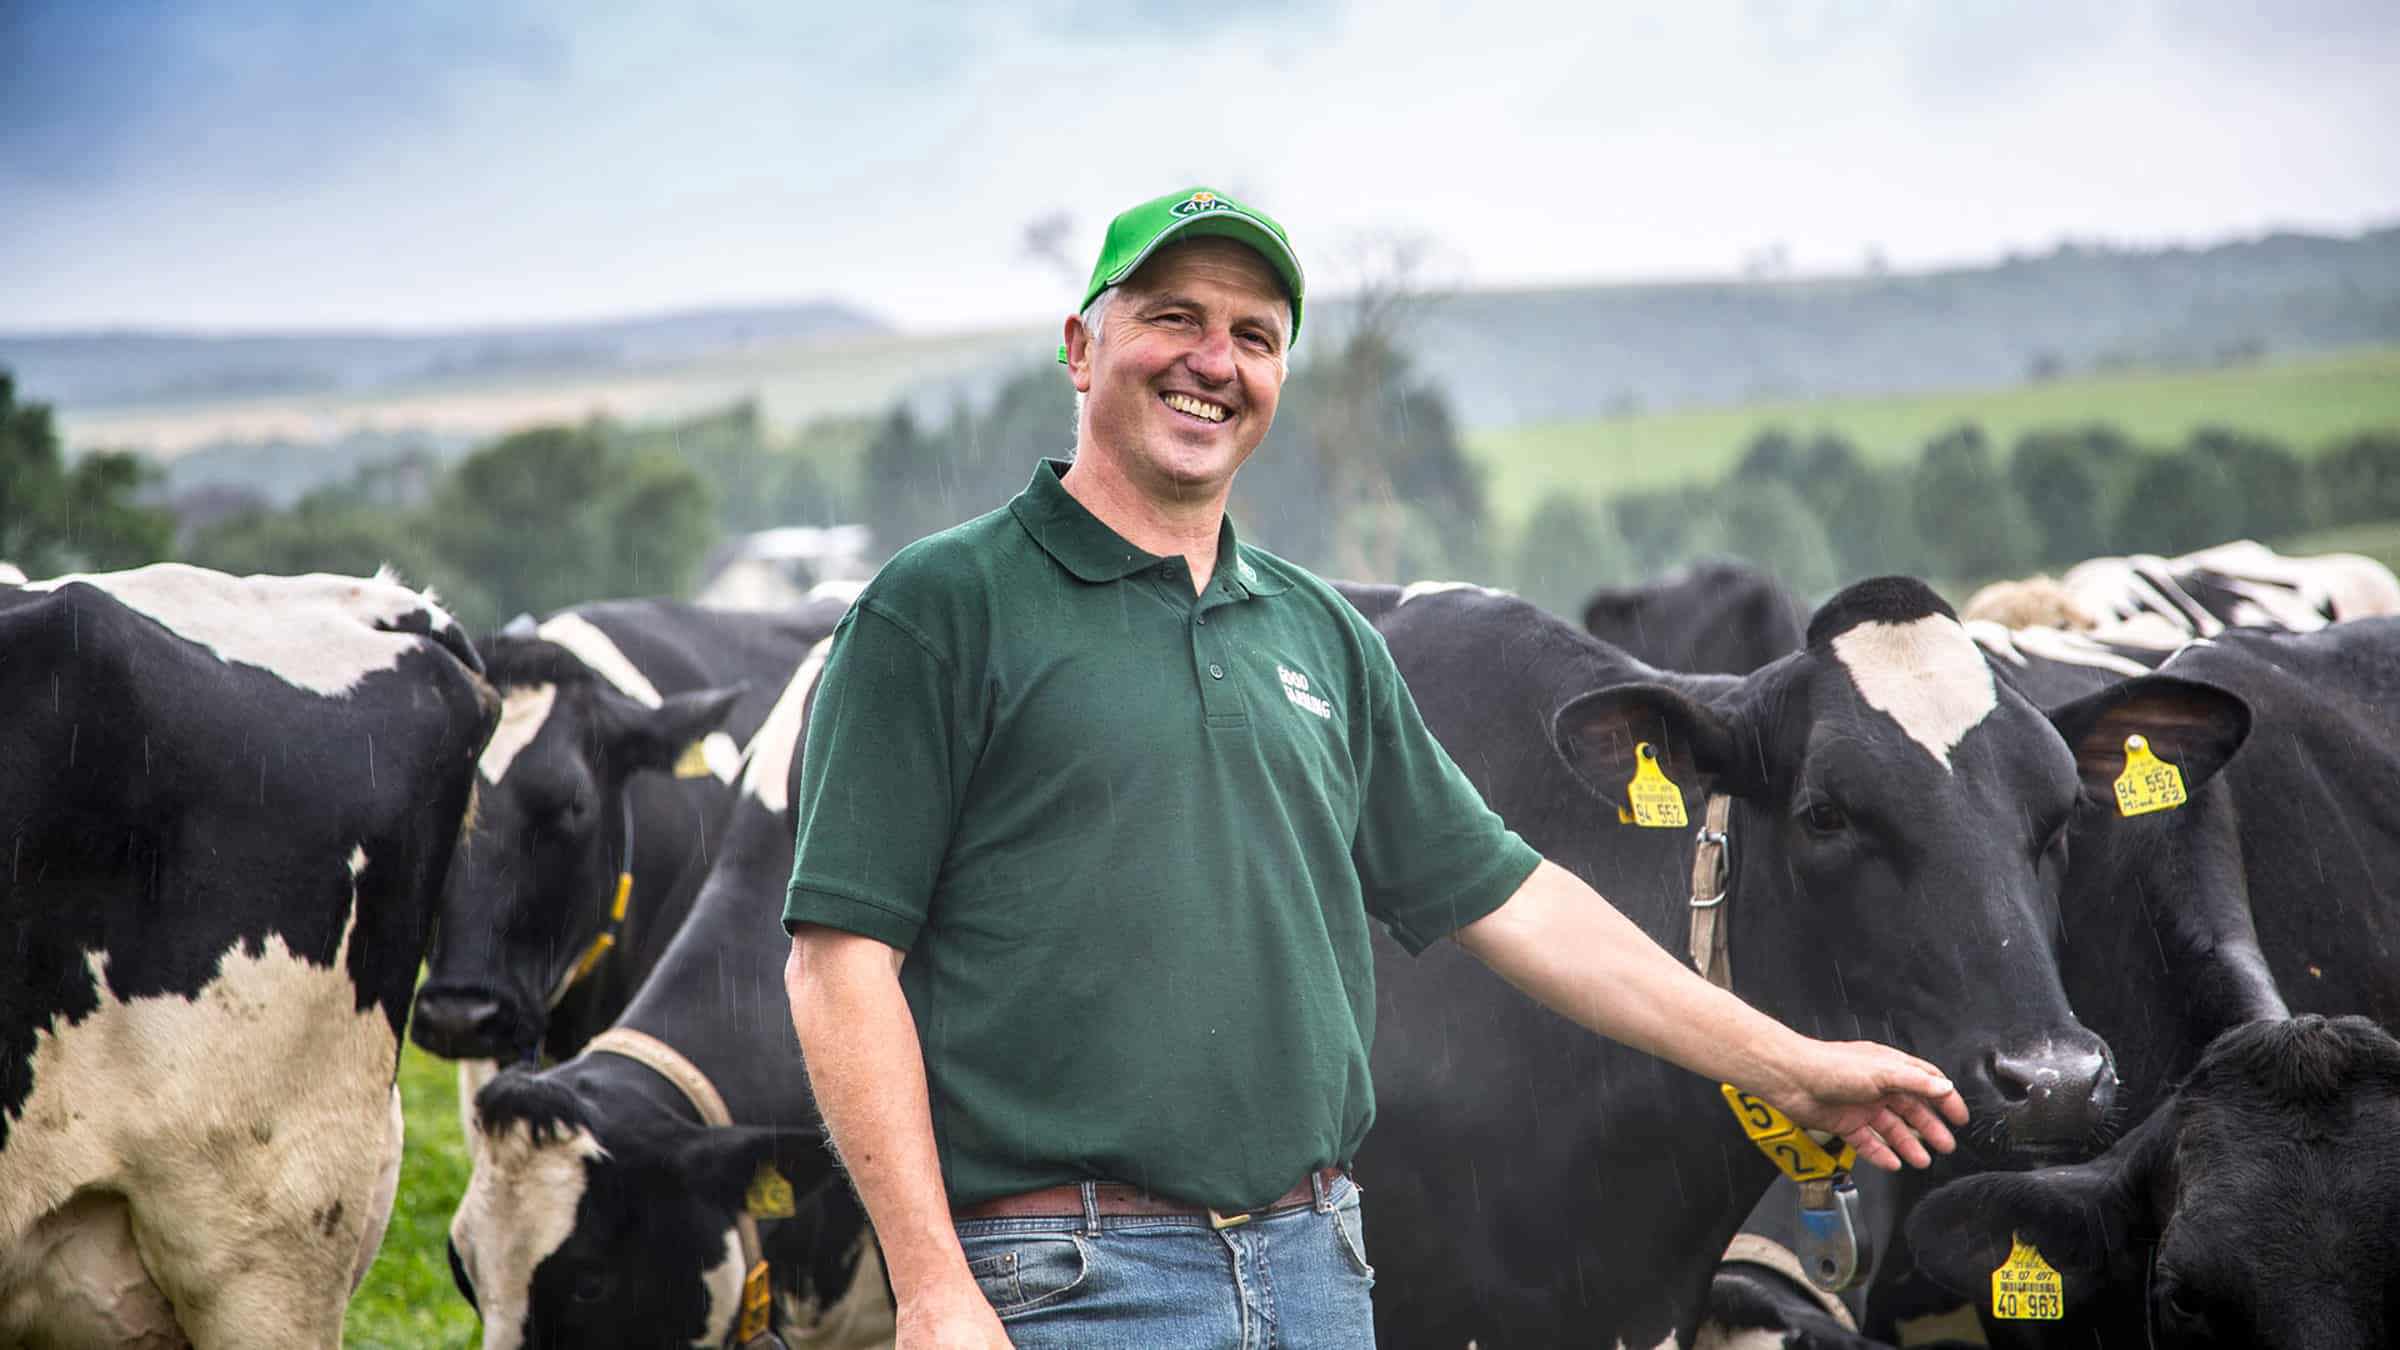 Farmer smiling in a field with cows